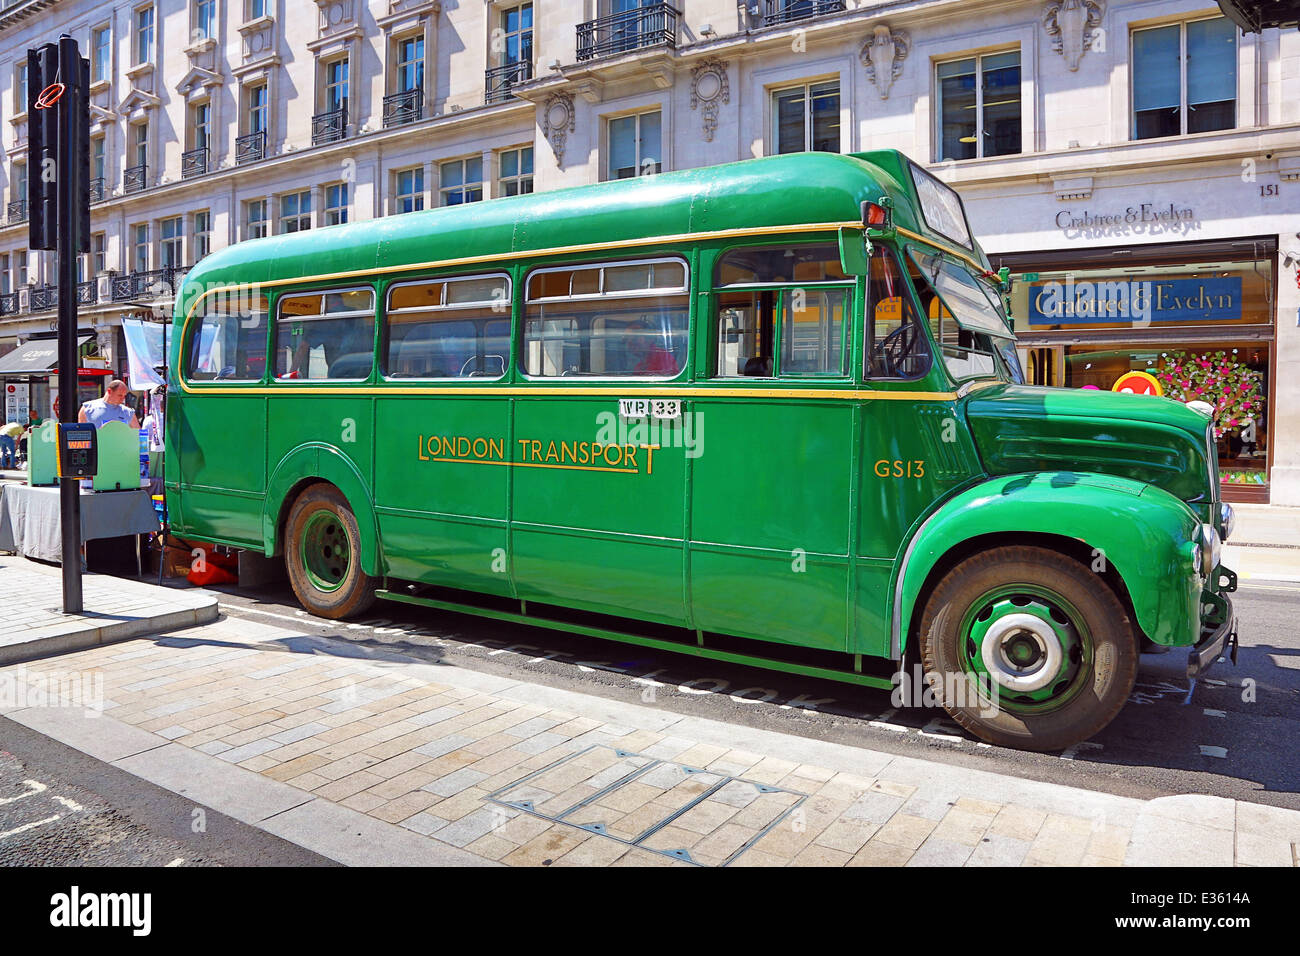 London, UK. 22nd June 2014. Guy Special Bus in service 1953-1972 at the Year of the Bus Cavalcade in Regent Street, London celebrating the role buses have played in moving people around London. Buses were on display from 1829 to the present day. Stock Photo